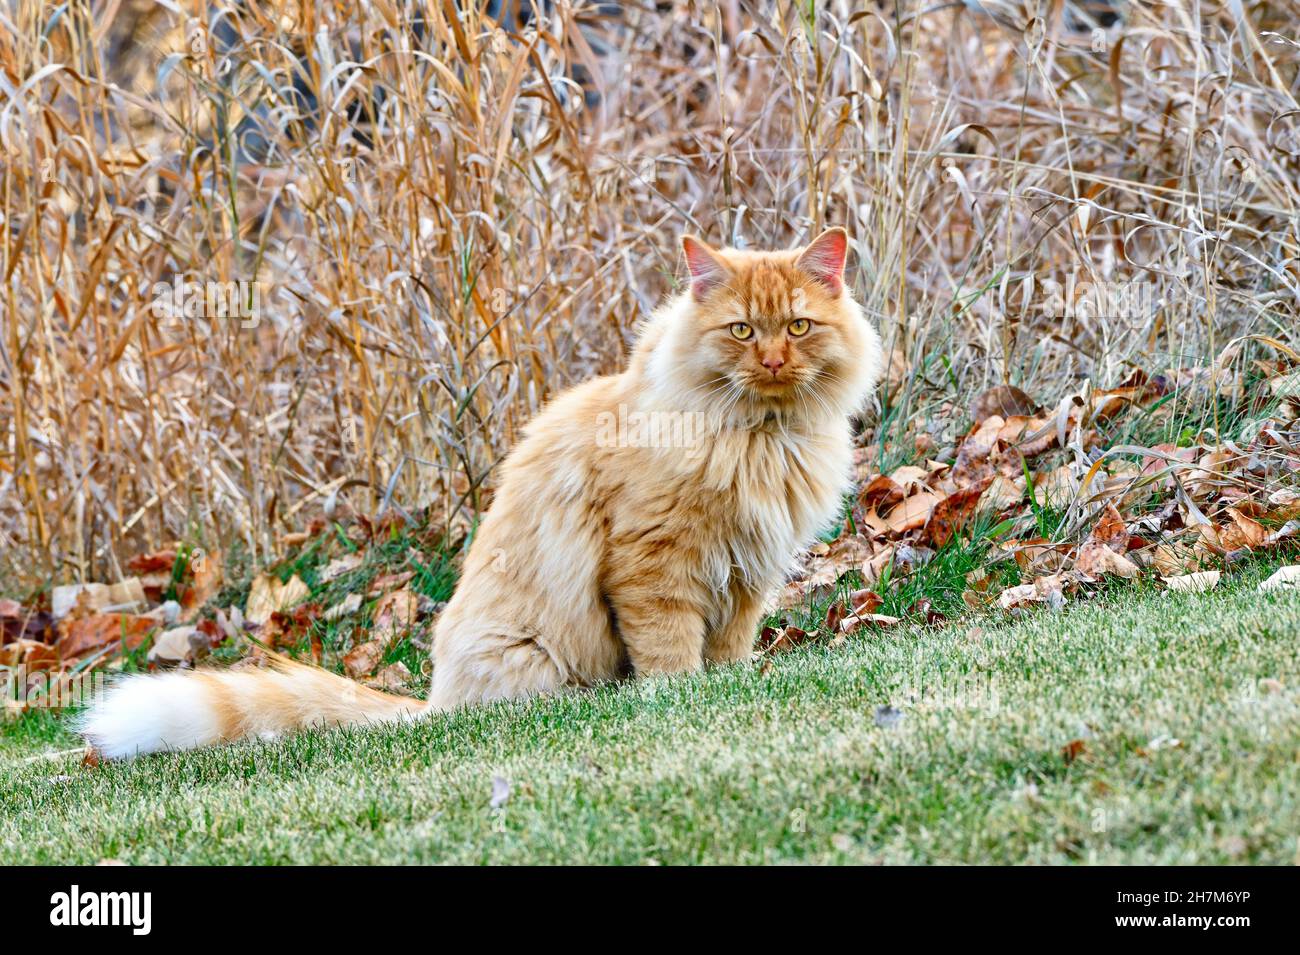 A domestic house cat 'Felis catus', sitting on a grass patch with fallen leaves and autumn colored grass in rural Alberta Canada. Stock Photo